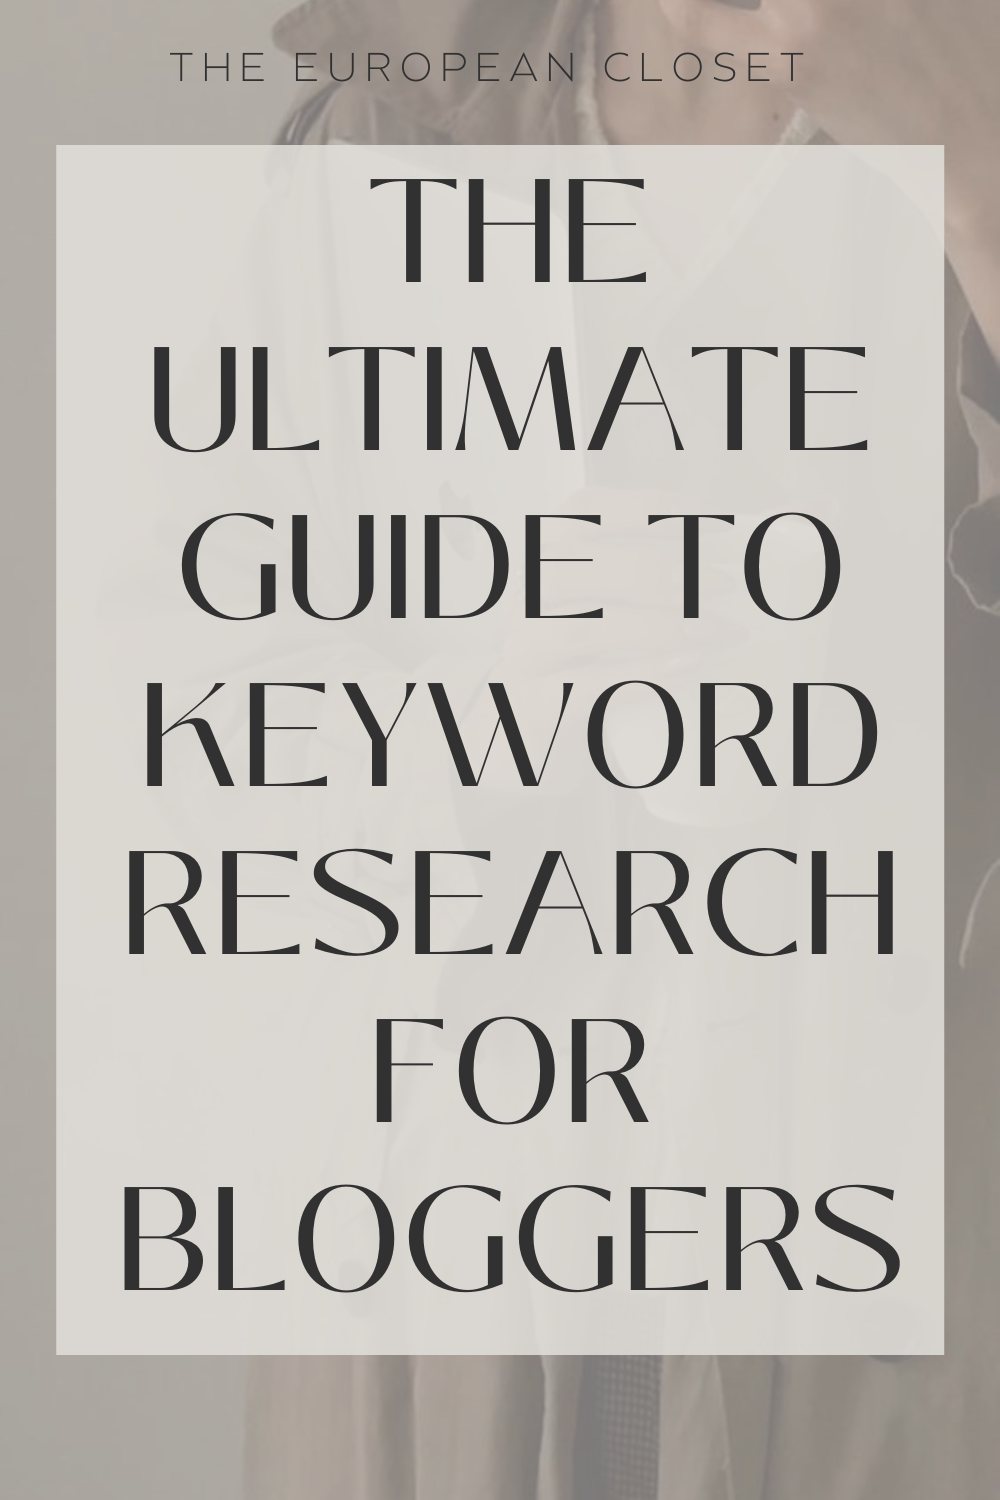 Here is the ultimate guide to keyword research for bloggers where I break down every single thing you need to do to rank on the 1st page of google